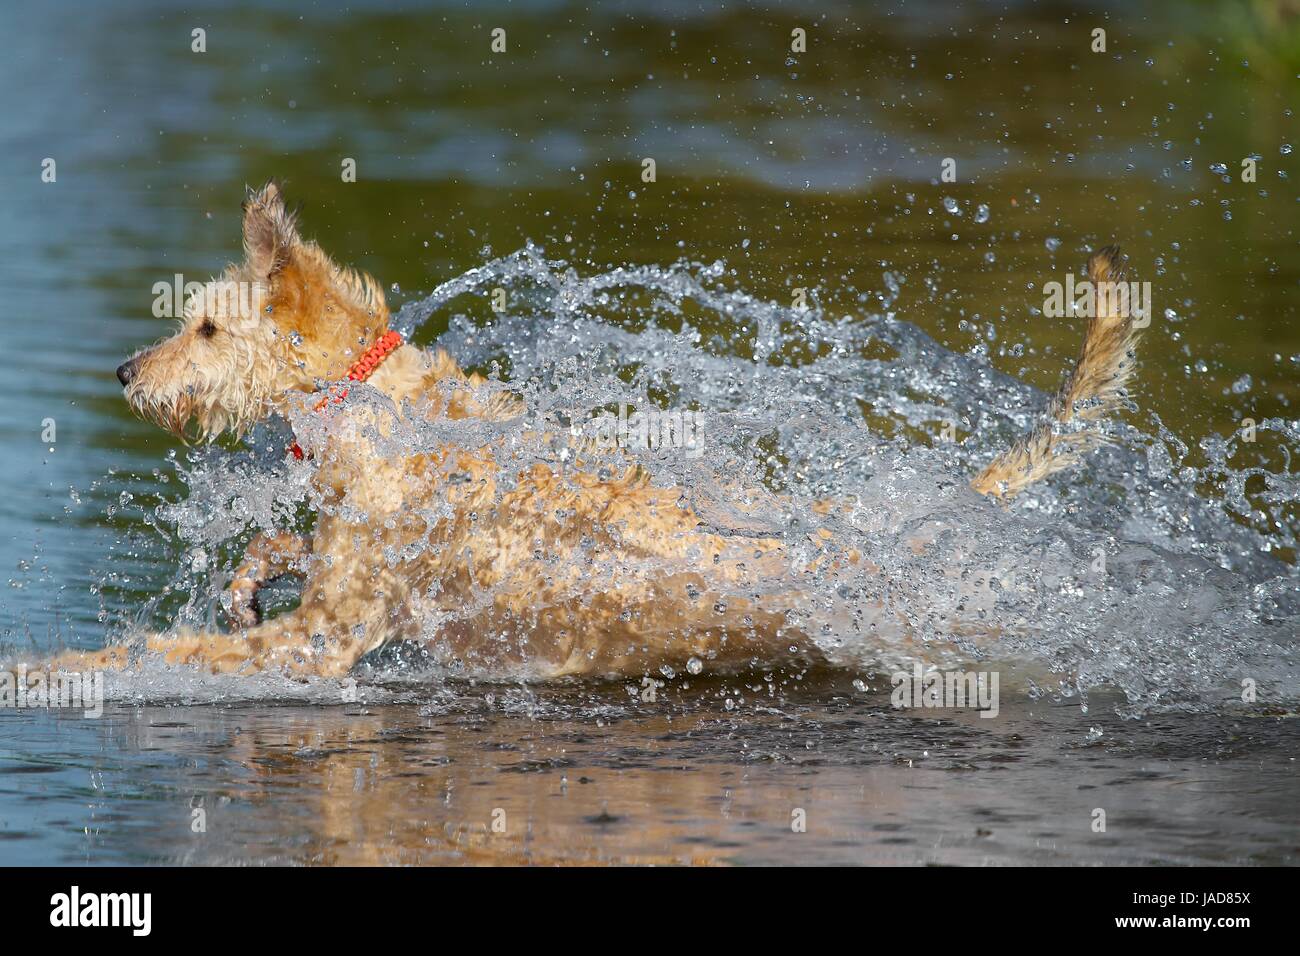 Hund Wasser Spritzen High Resolution Stock Photography and Images - Alamy